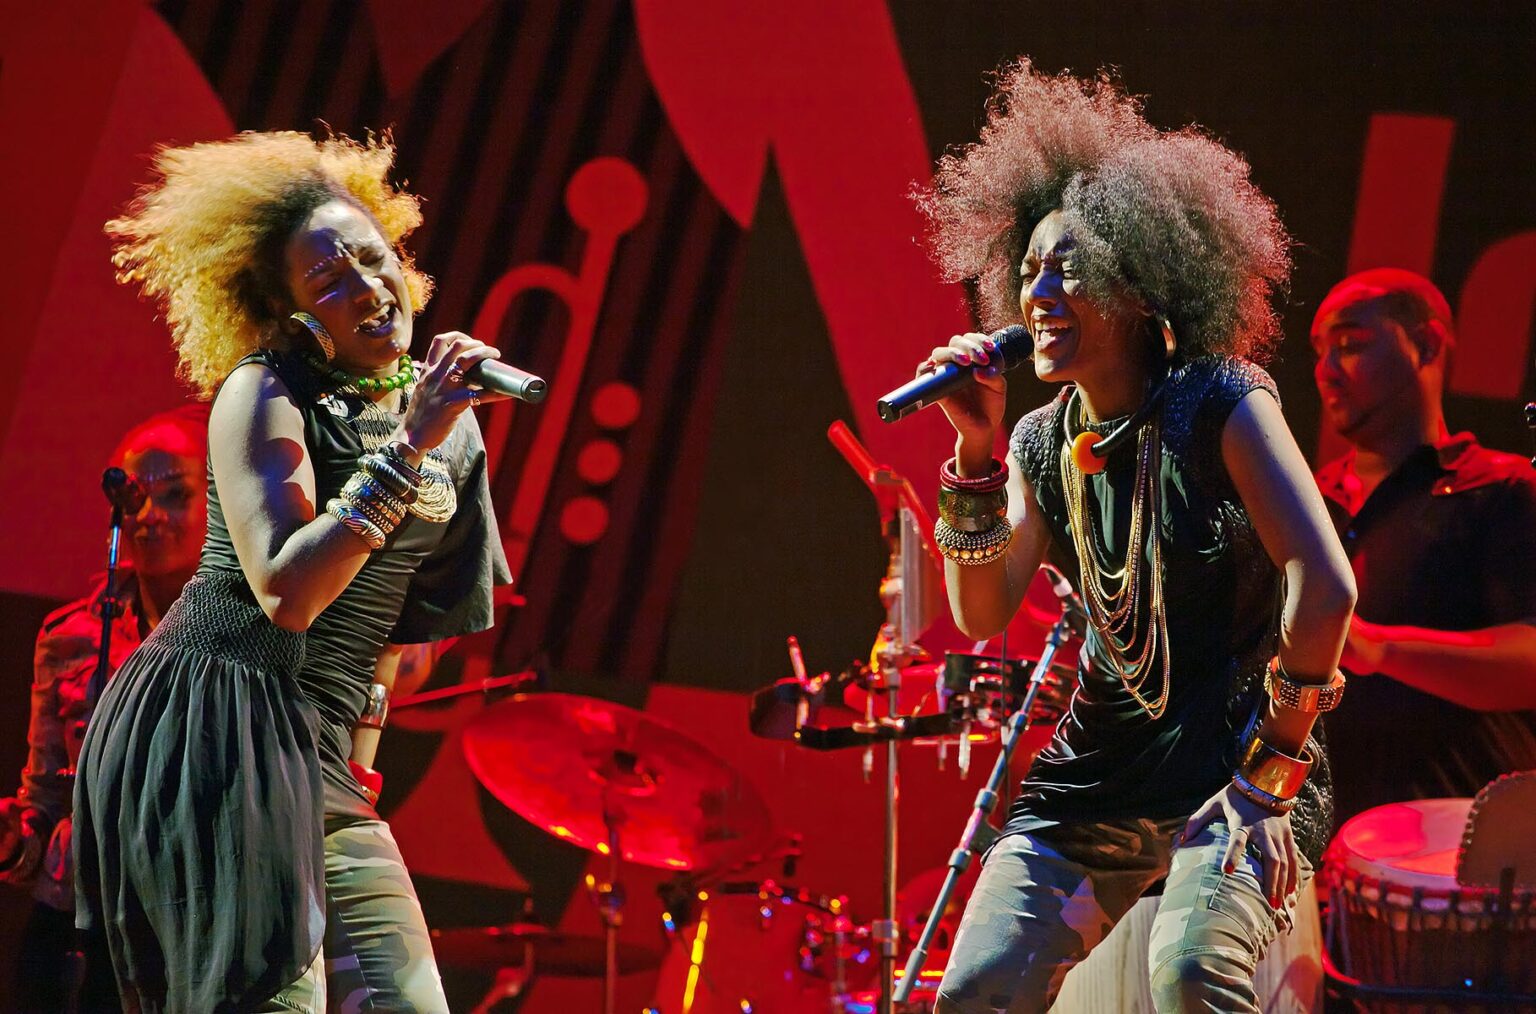 CELIA and HELENE FAUSSART sing as LES NUBIANS on the Jimmy Lyons Stage - 2010 MONTEREY JAZZ FESTIVAL, CALIFORINA